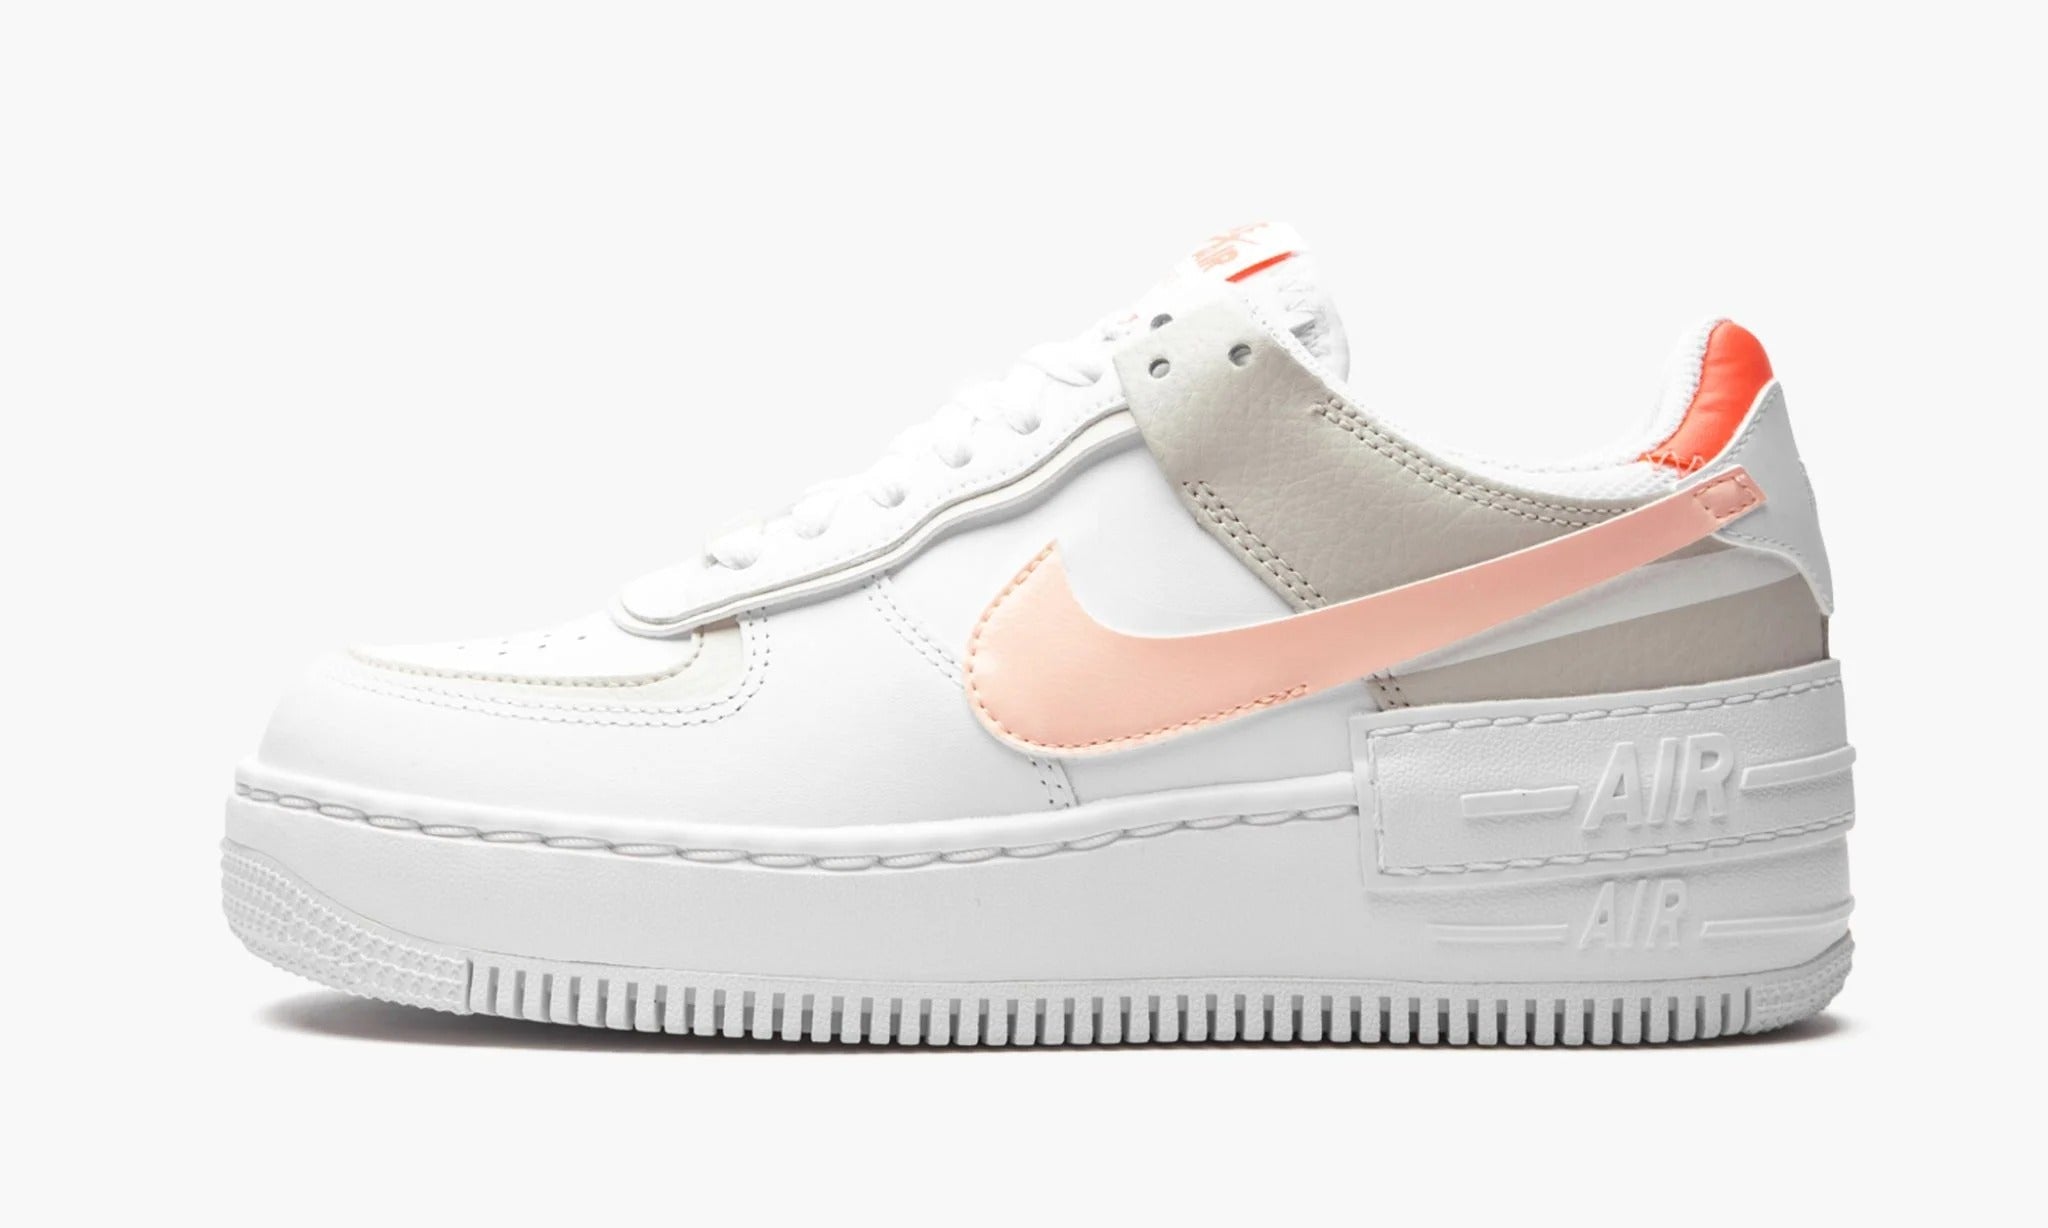 Nike Air Force 1 Shadow. Nike Air Force 1 Low Shadow Spruce Aura. Nike Air Force 1 Low Shadow "citron Tint кроссовки.